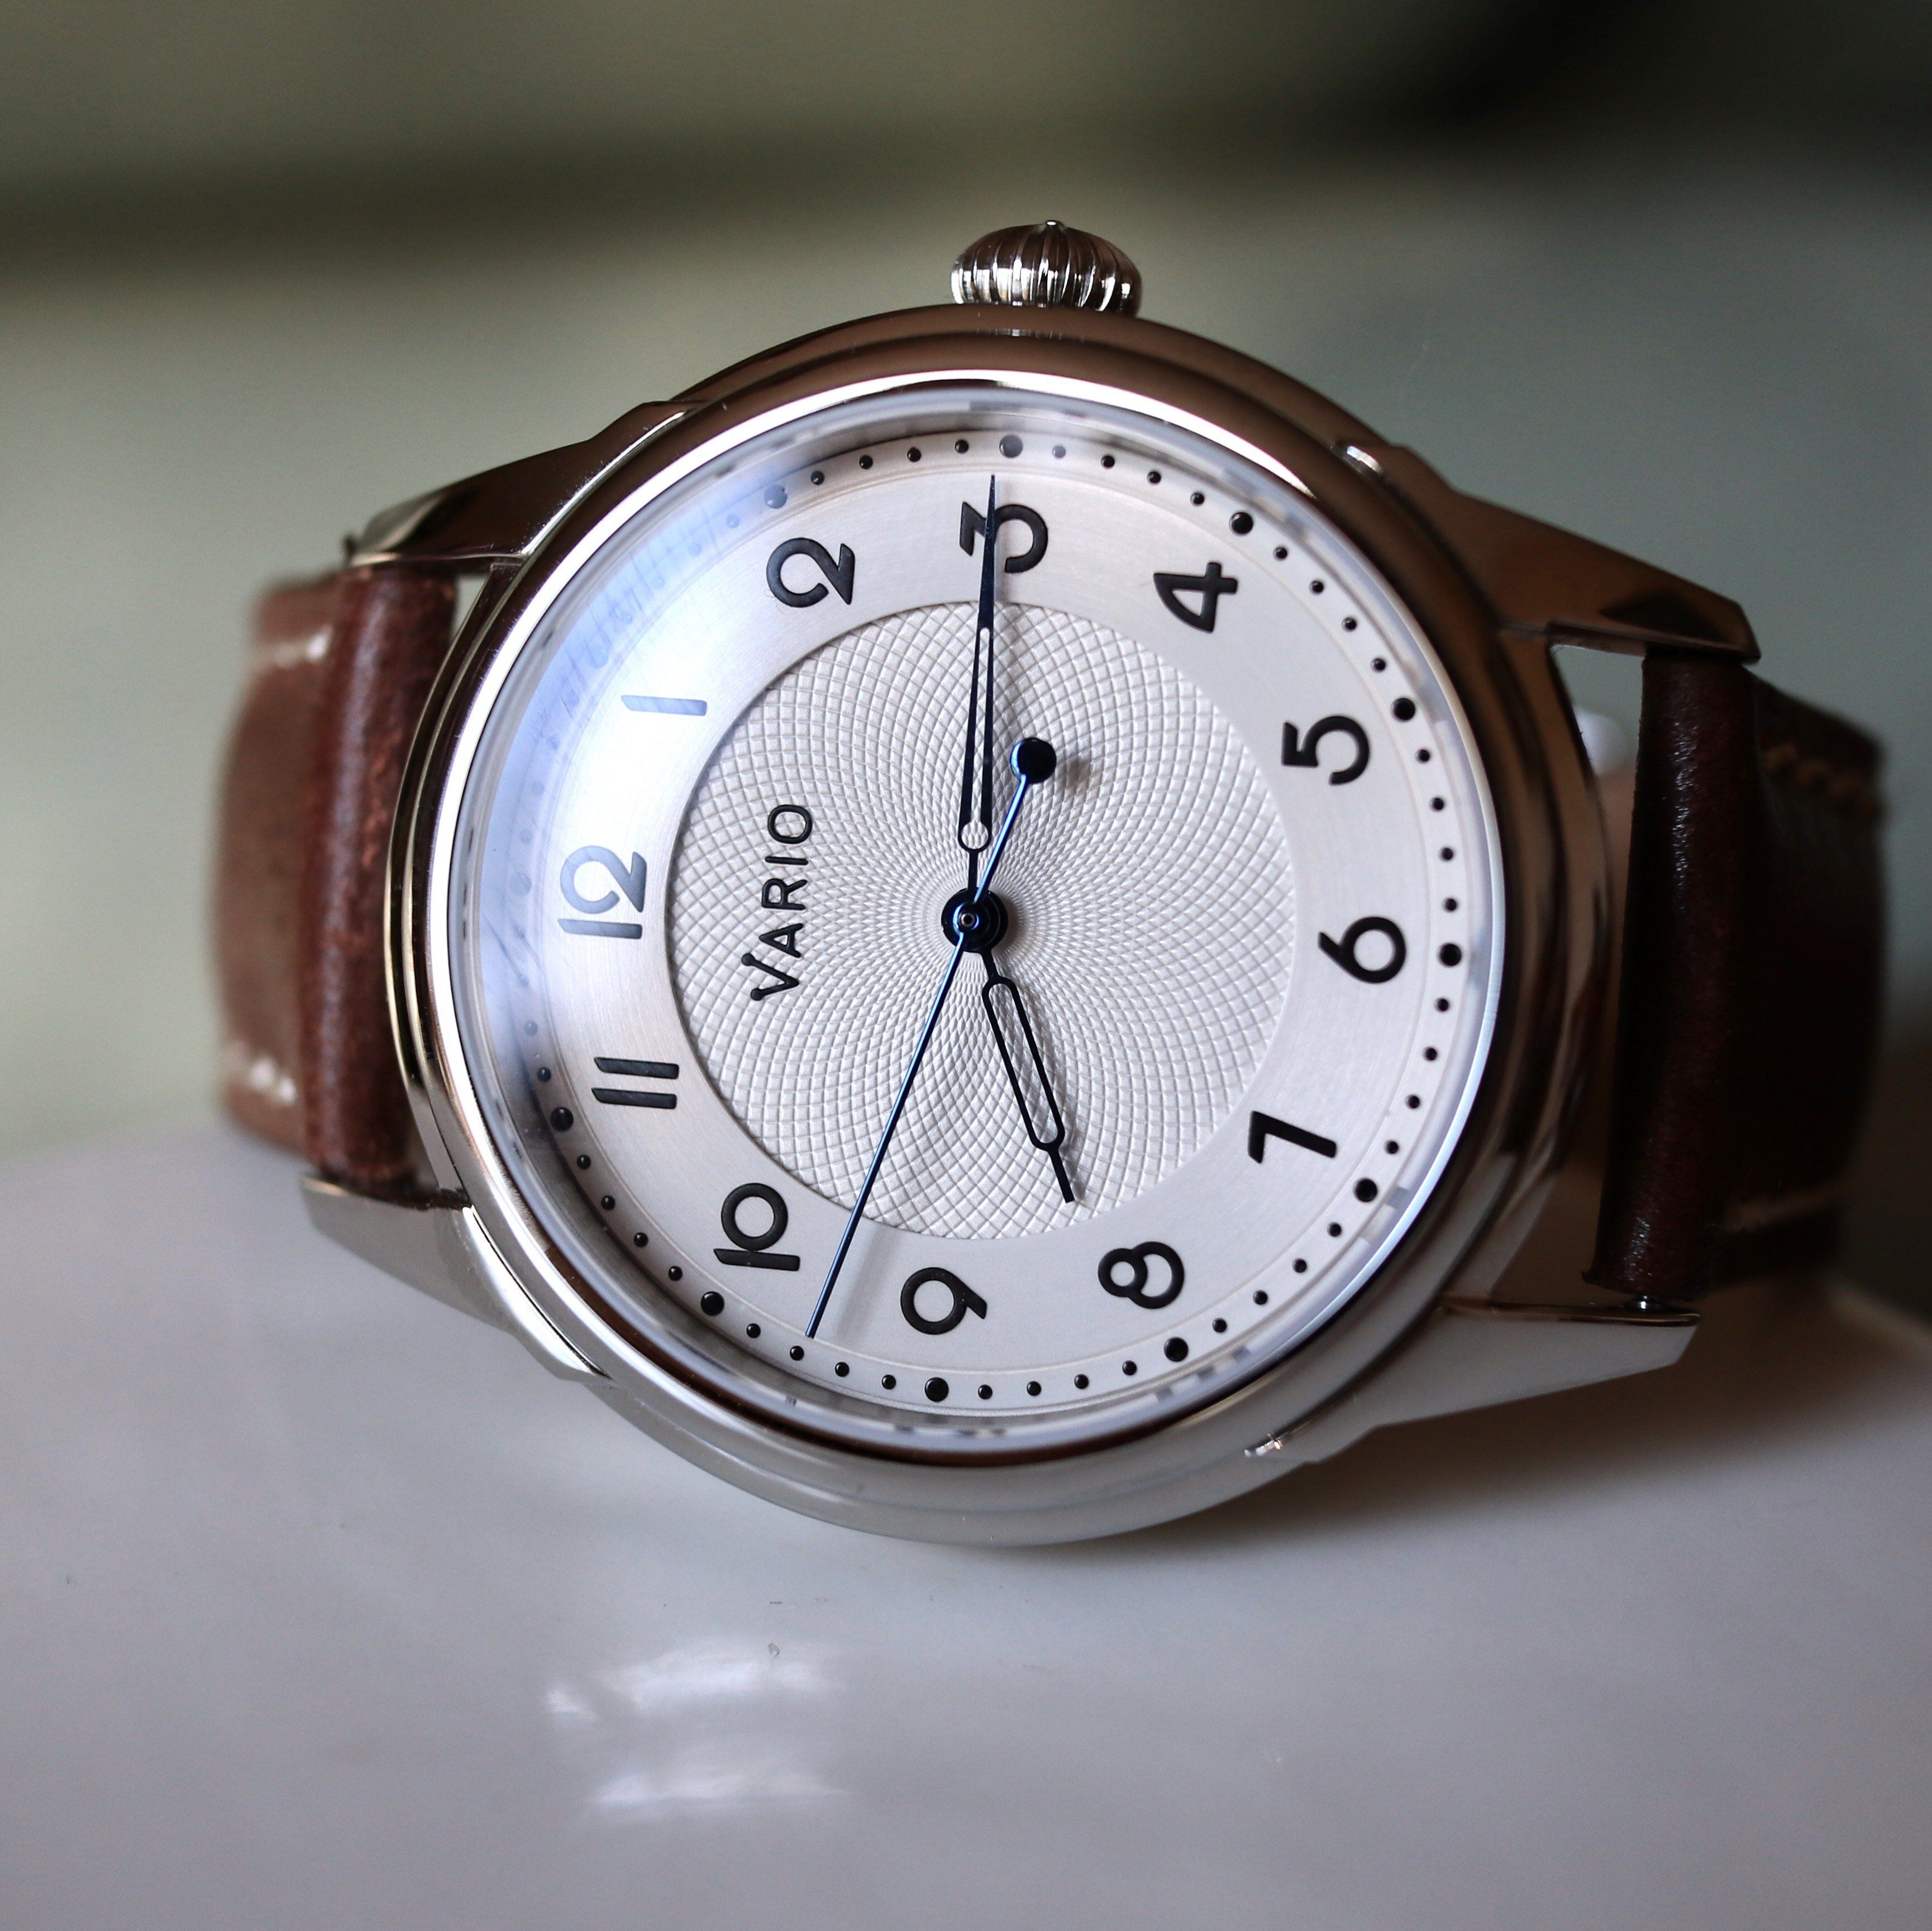 Check out our Vario Empire (White Dial). Photo by Mike for @thetimebum